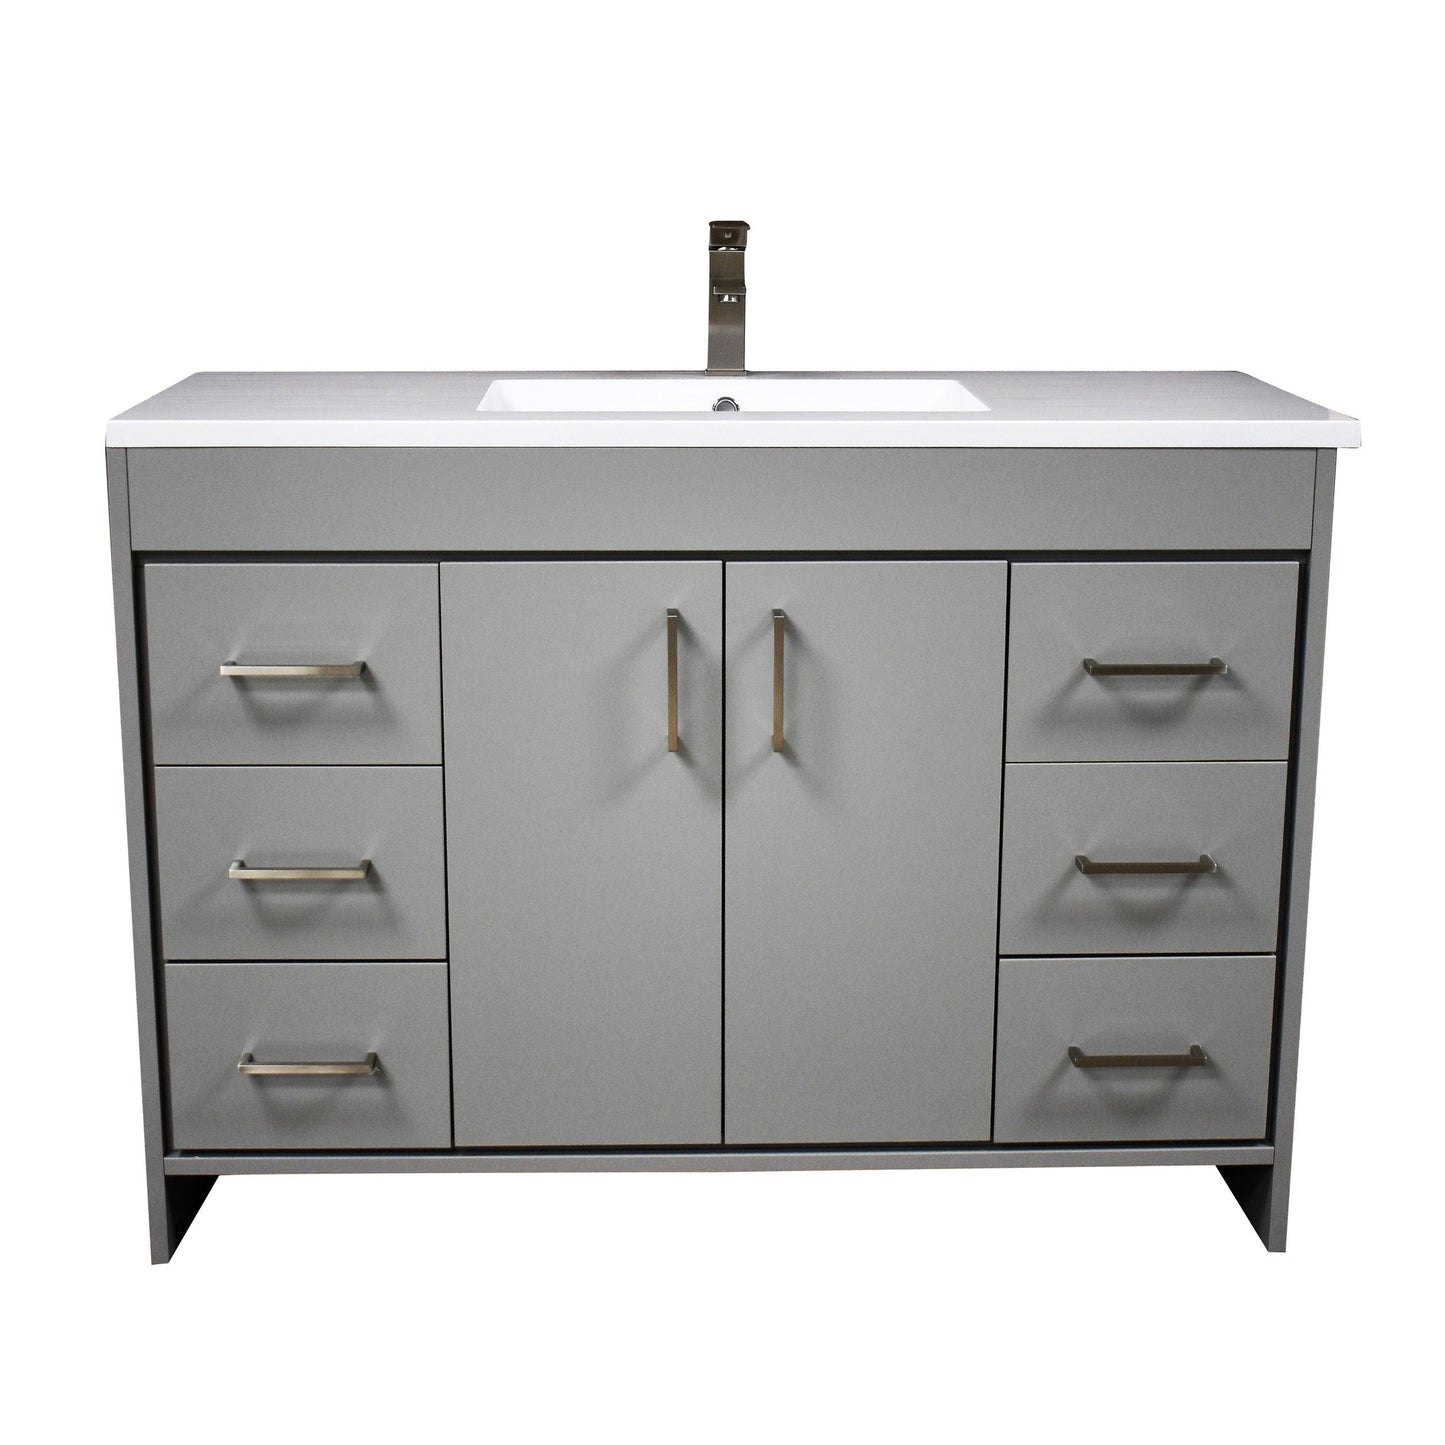 Volpa USA Rio 60" Gray Freestanding Modern Bathroom Vanity With Integrated Acrylic Single Sink Top and Brushed Nickel Handles